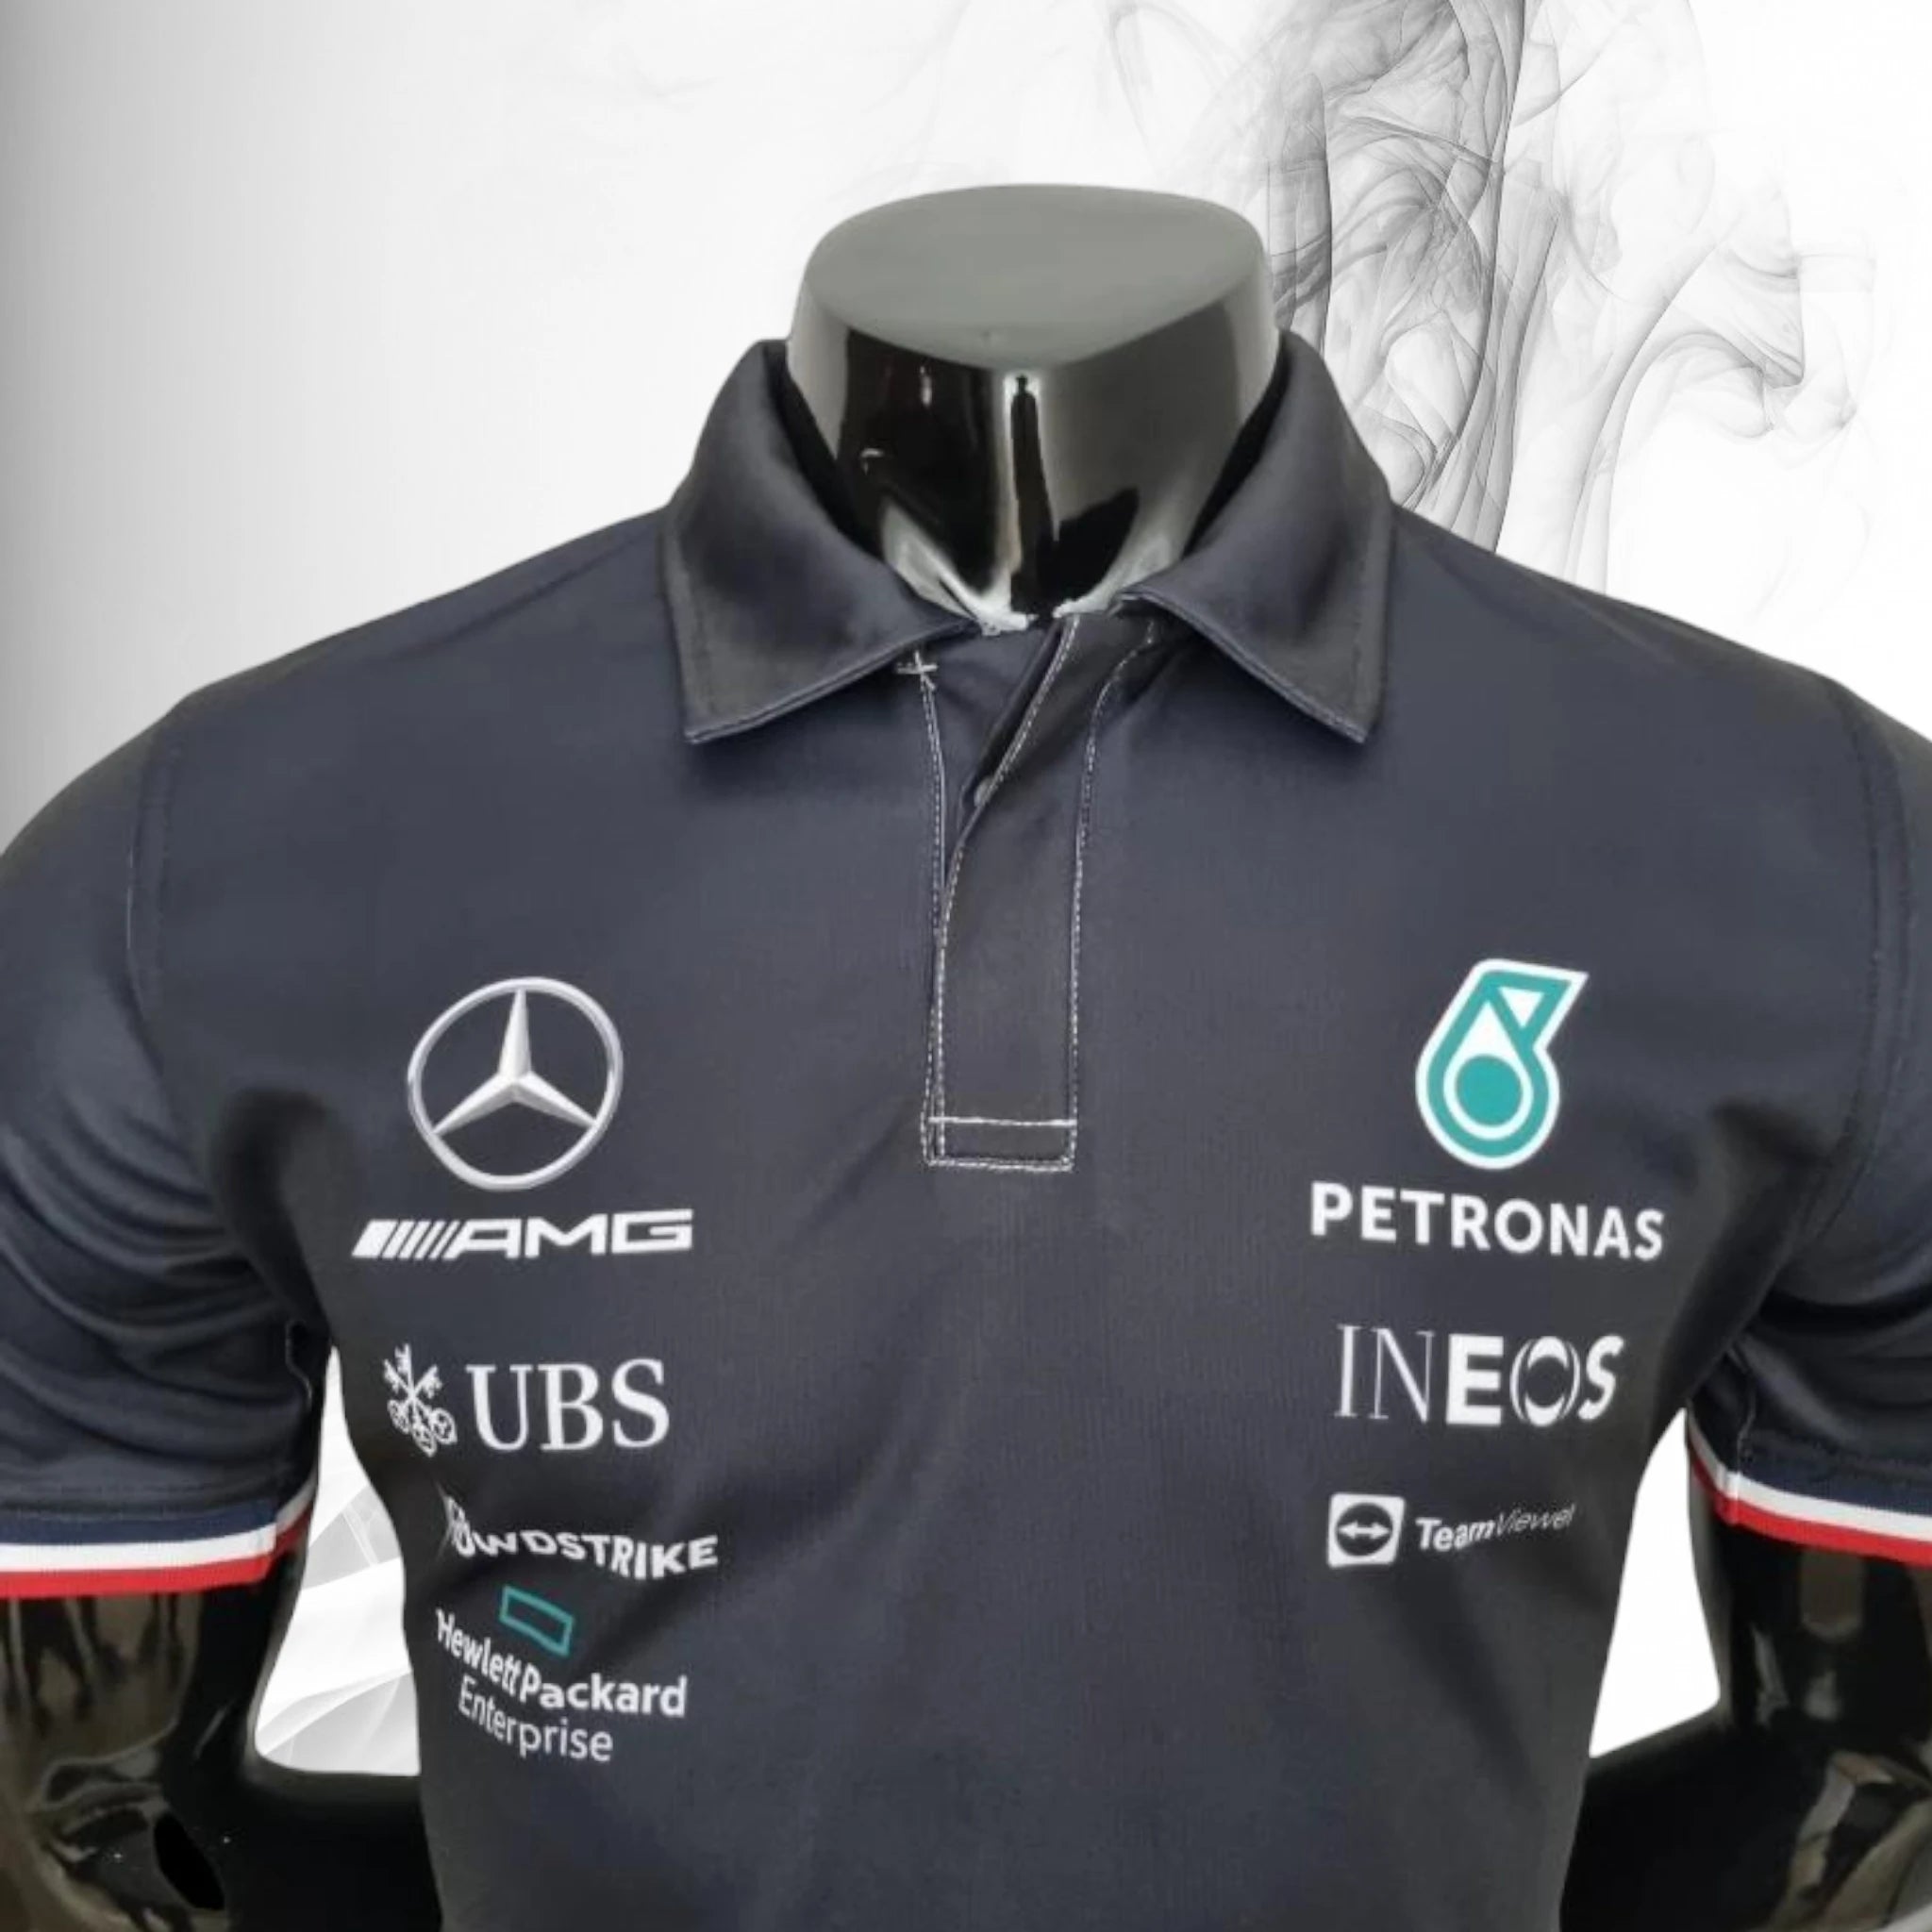 2022 Mercedes Benz George Russell Polo Shirt